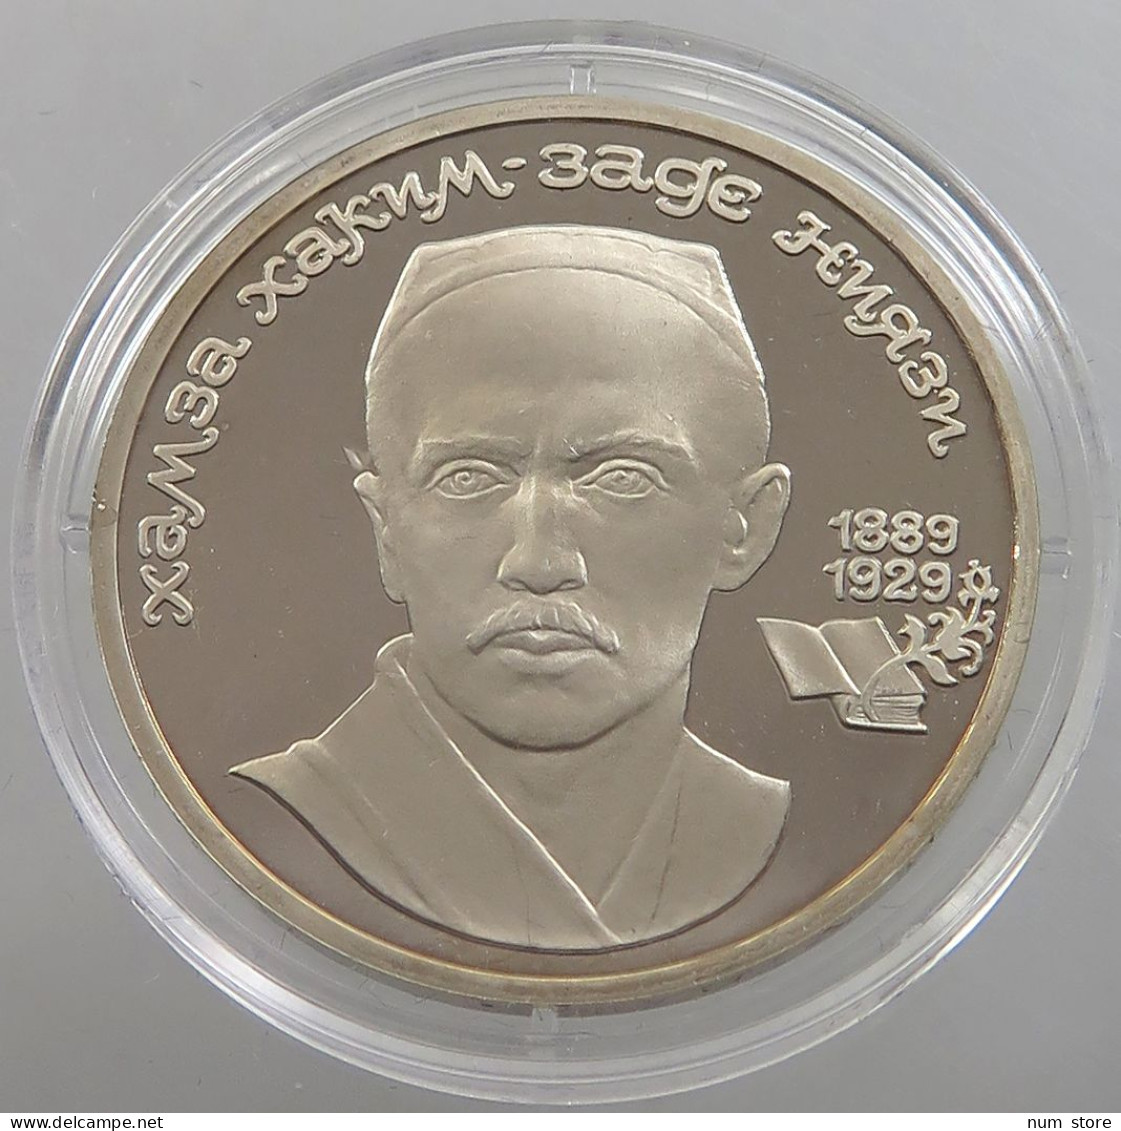 RUSSIA USSR 1 ROUBLE 1989 NIAZI PROOF #sm14 0543 - Russia